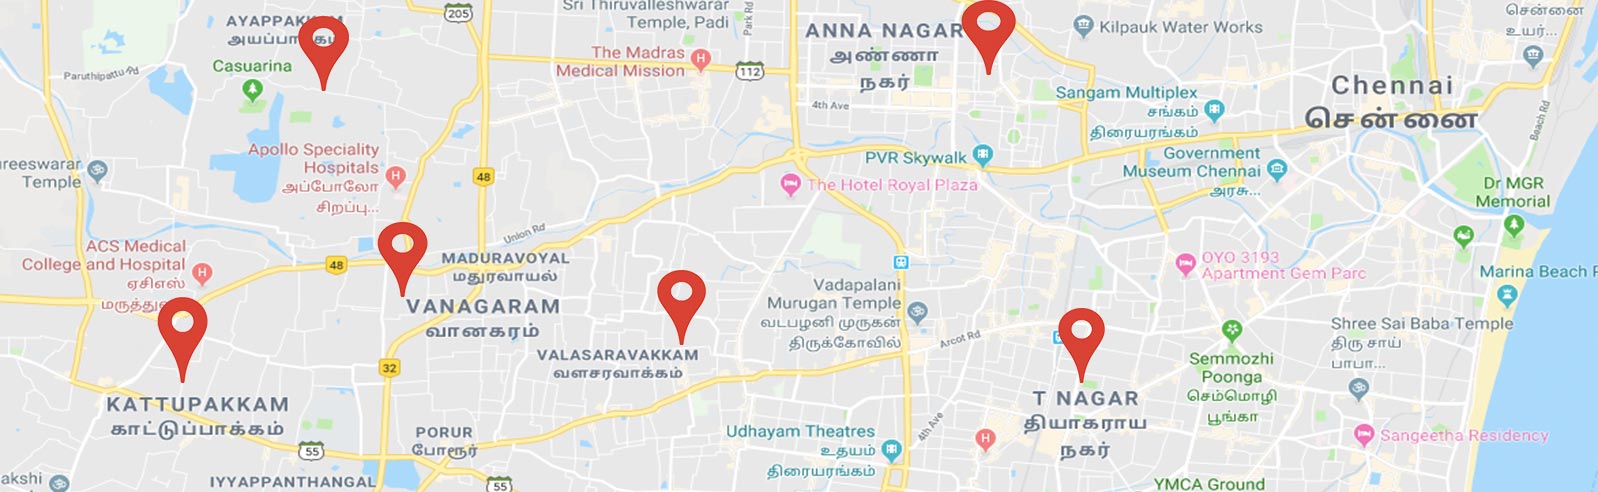 professional escorts services location map